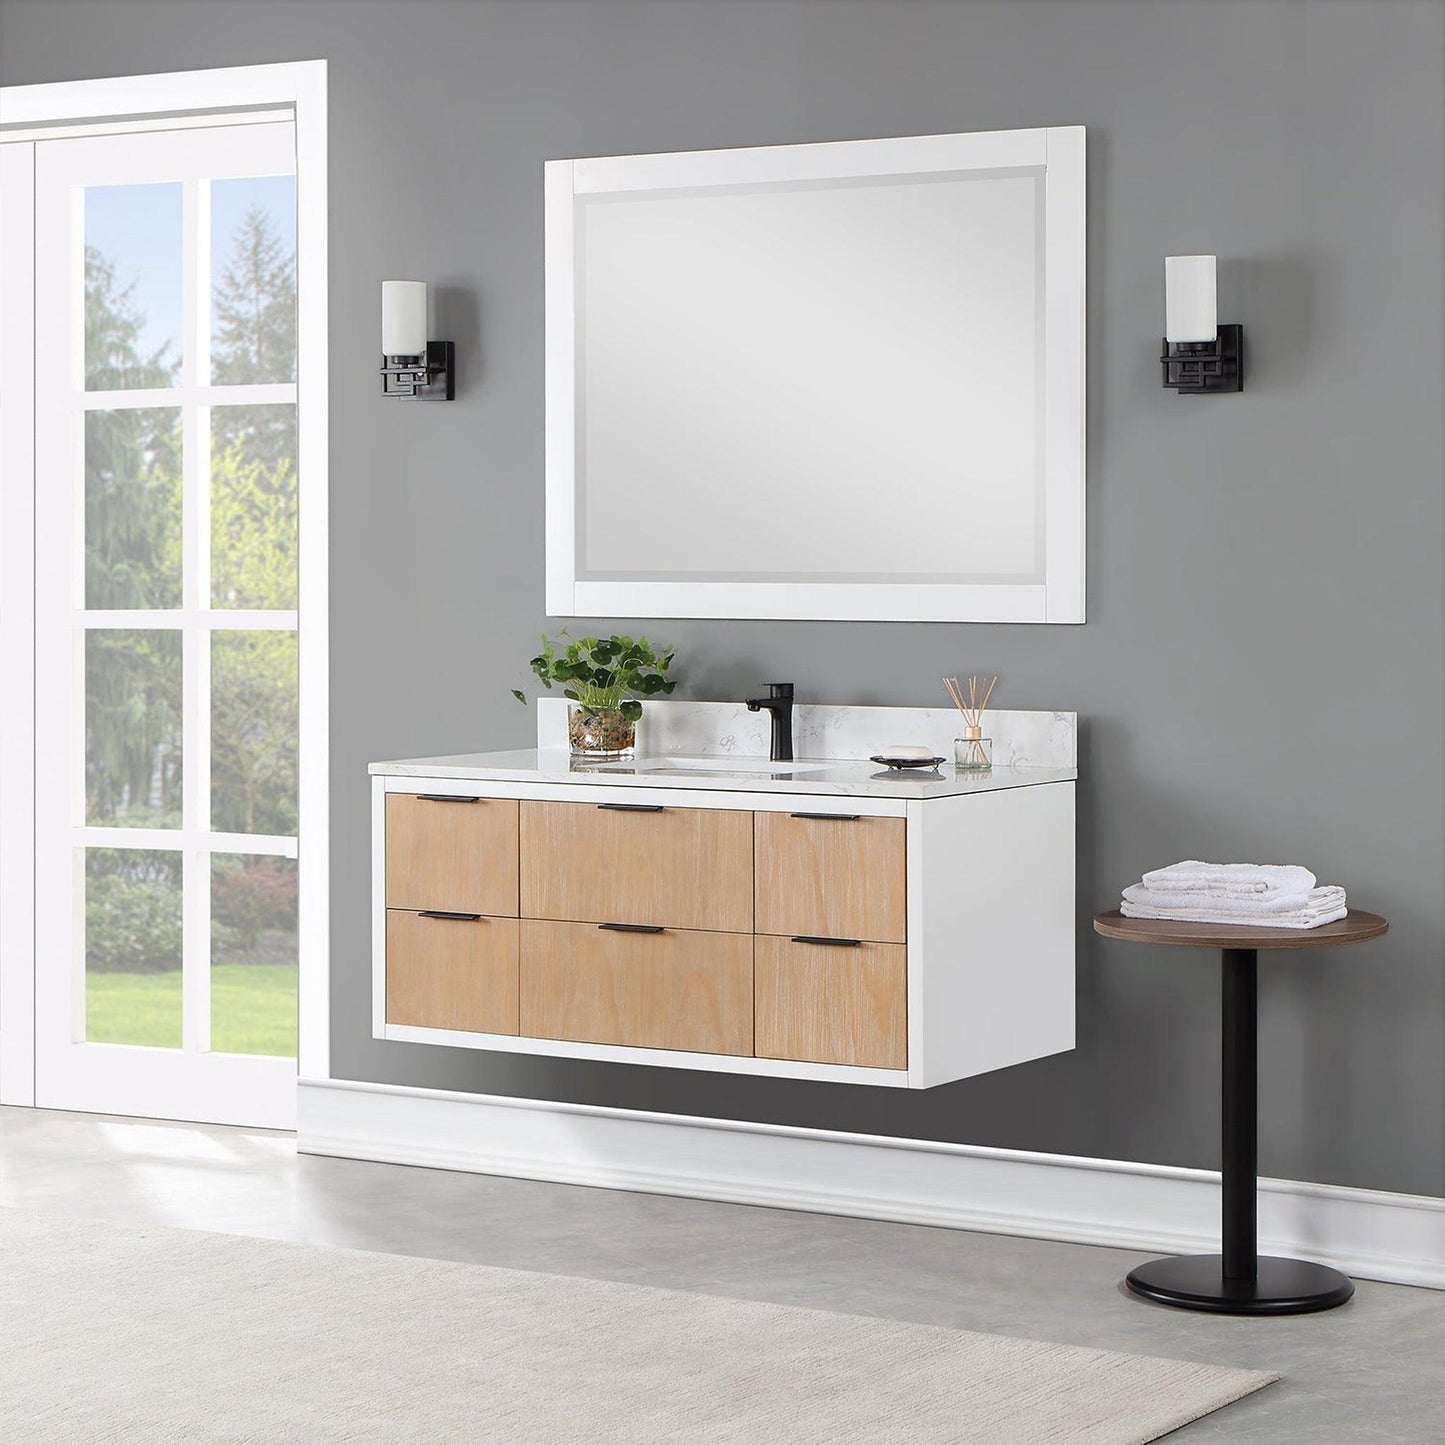 Altair Dione 48" Single Weathered Pine Wall-Mounted Bathroom Vanity Set With Mirror, Aosta White Composite Stone Top, Single Rectangular Undermount Ceramic Sink, Overflow, and Backsplash